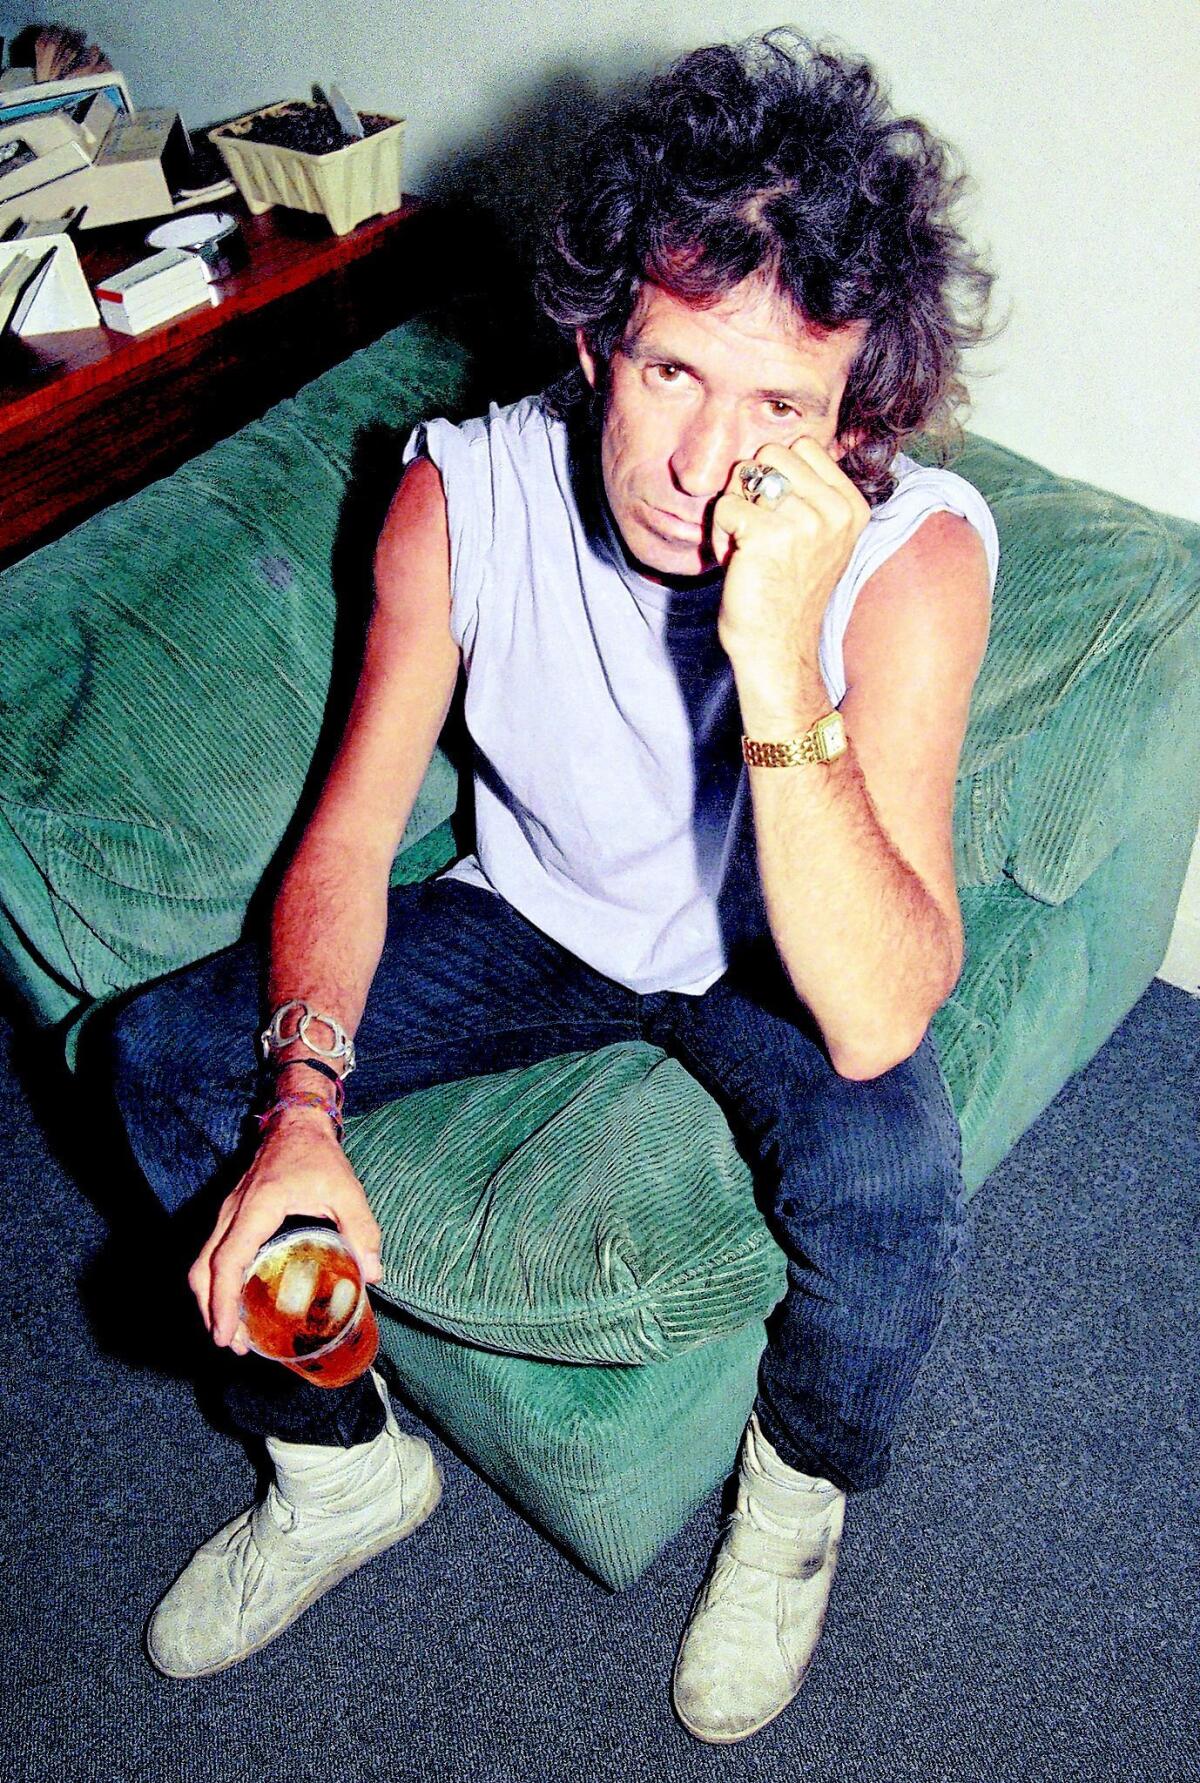 Stoned alone: Keith Richards' 'Life' selectively memorable - The 